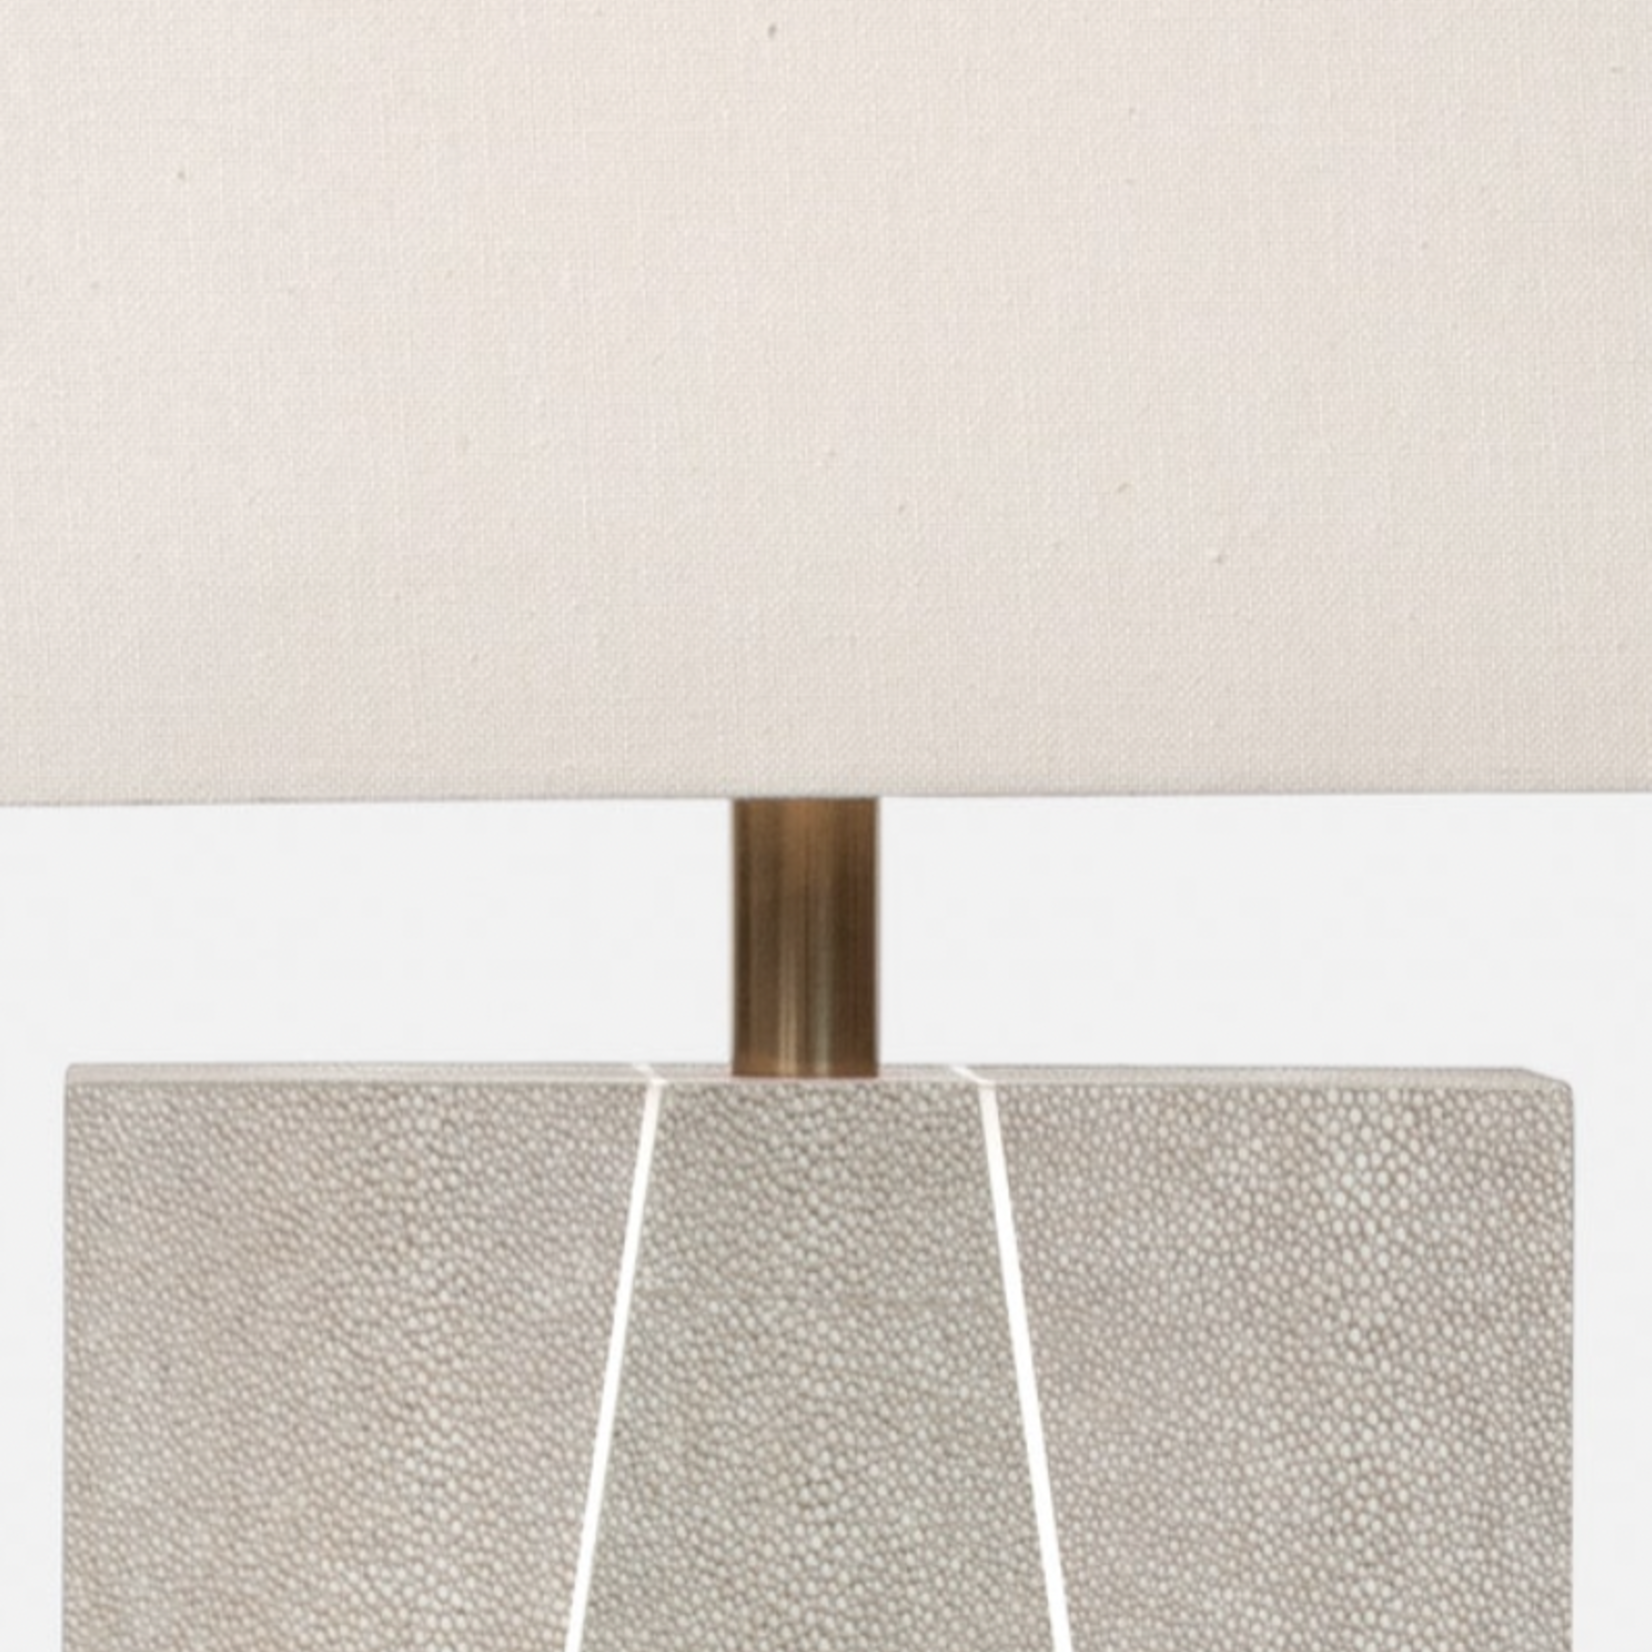 Made Goods Breck Table Lamp, Mixed Sand Realistic Faux Shagreen